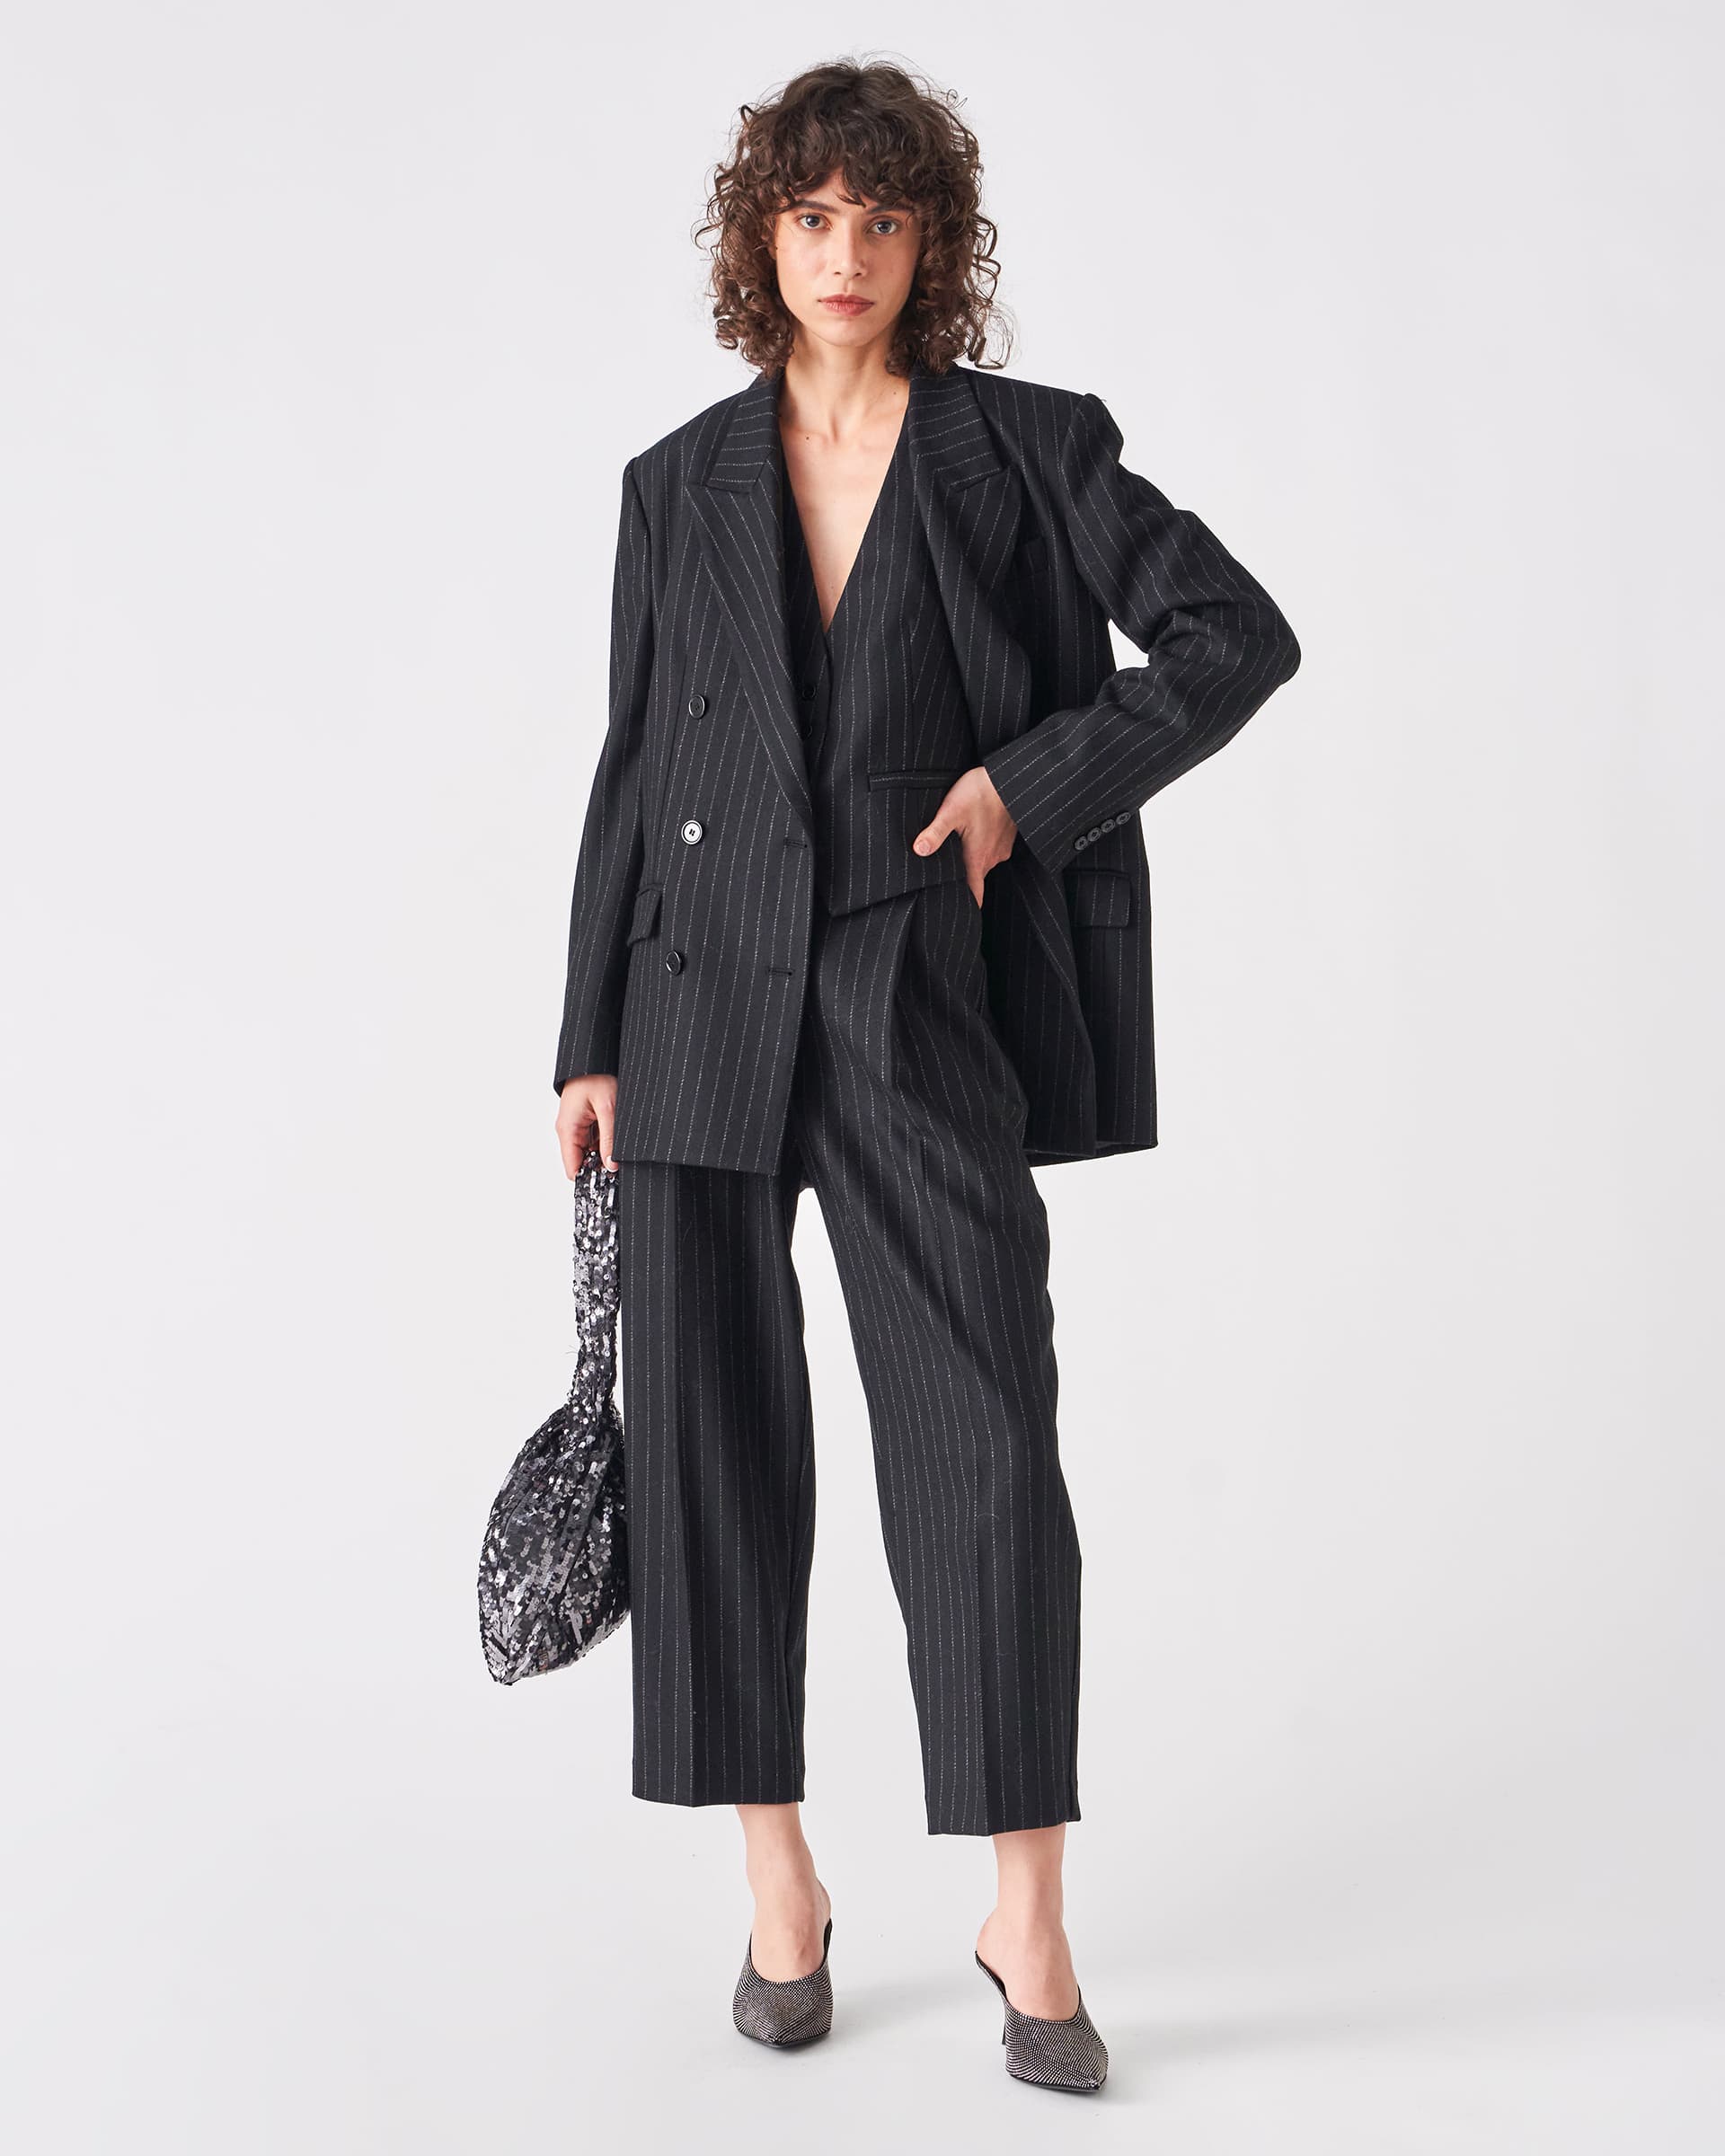 The Market Store | Overall Double-breasted Jacket